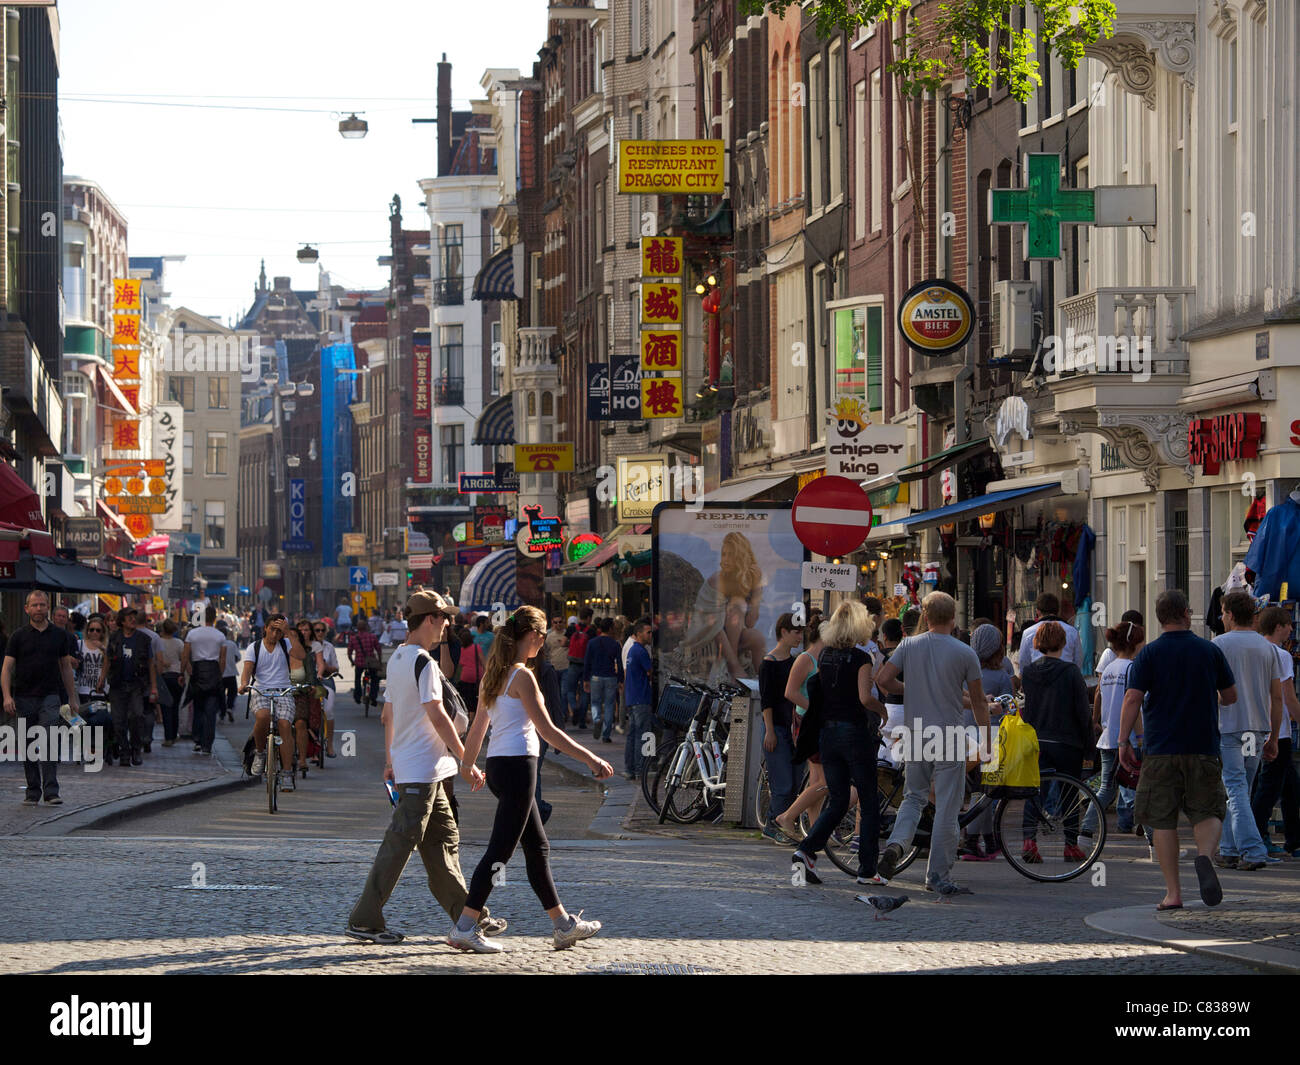 Damstraat Dam street with many people in Amsterdam, the Netherlands Stock Photo